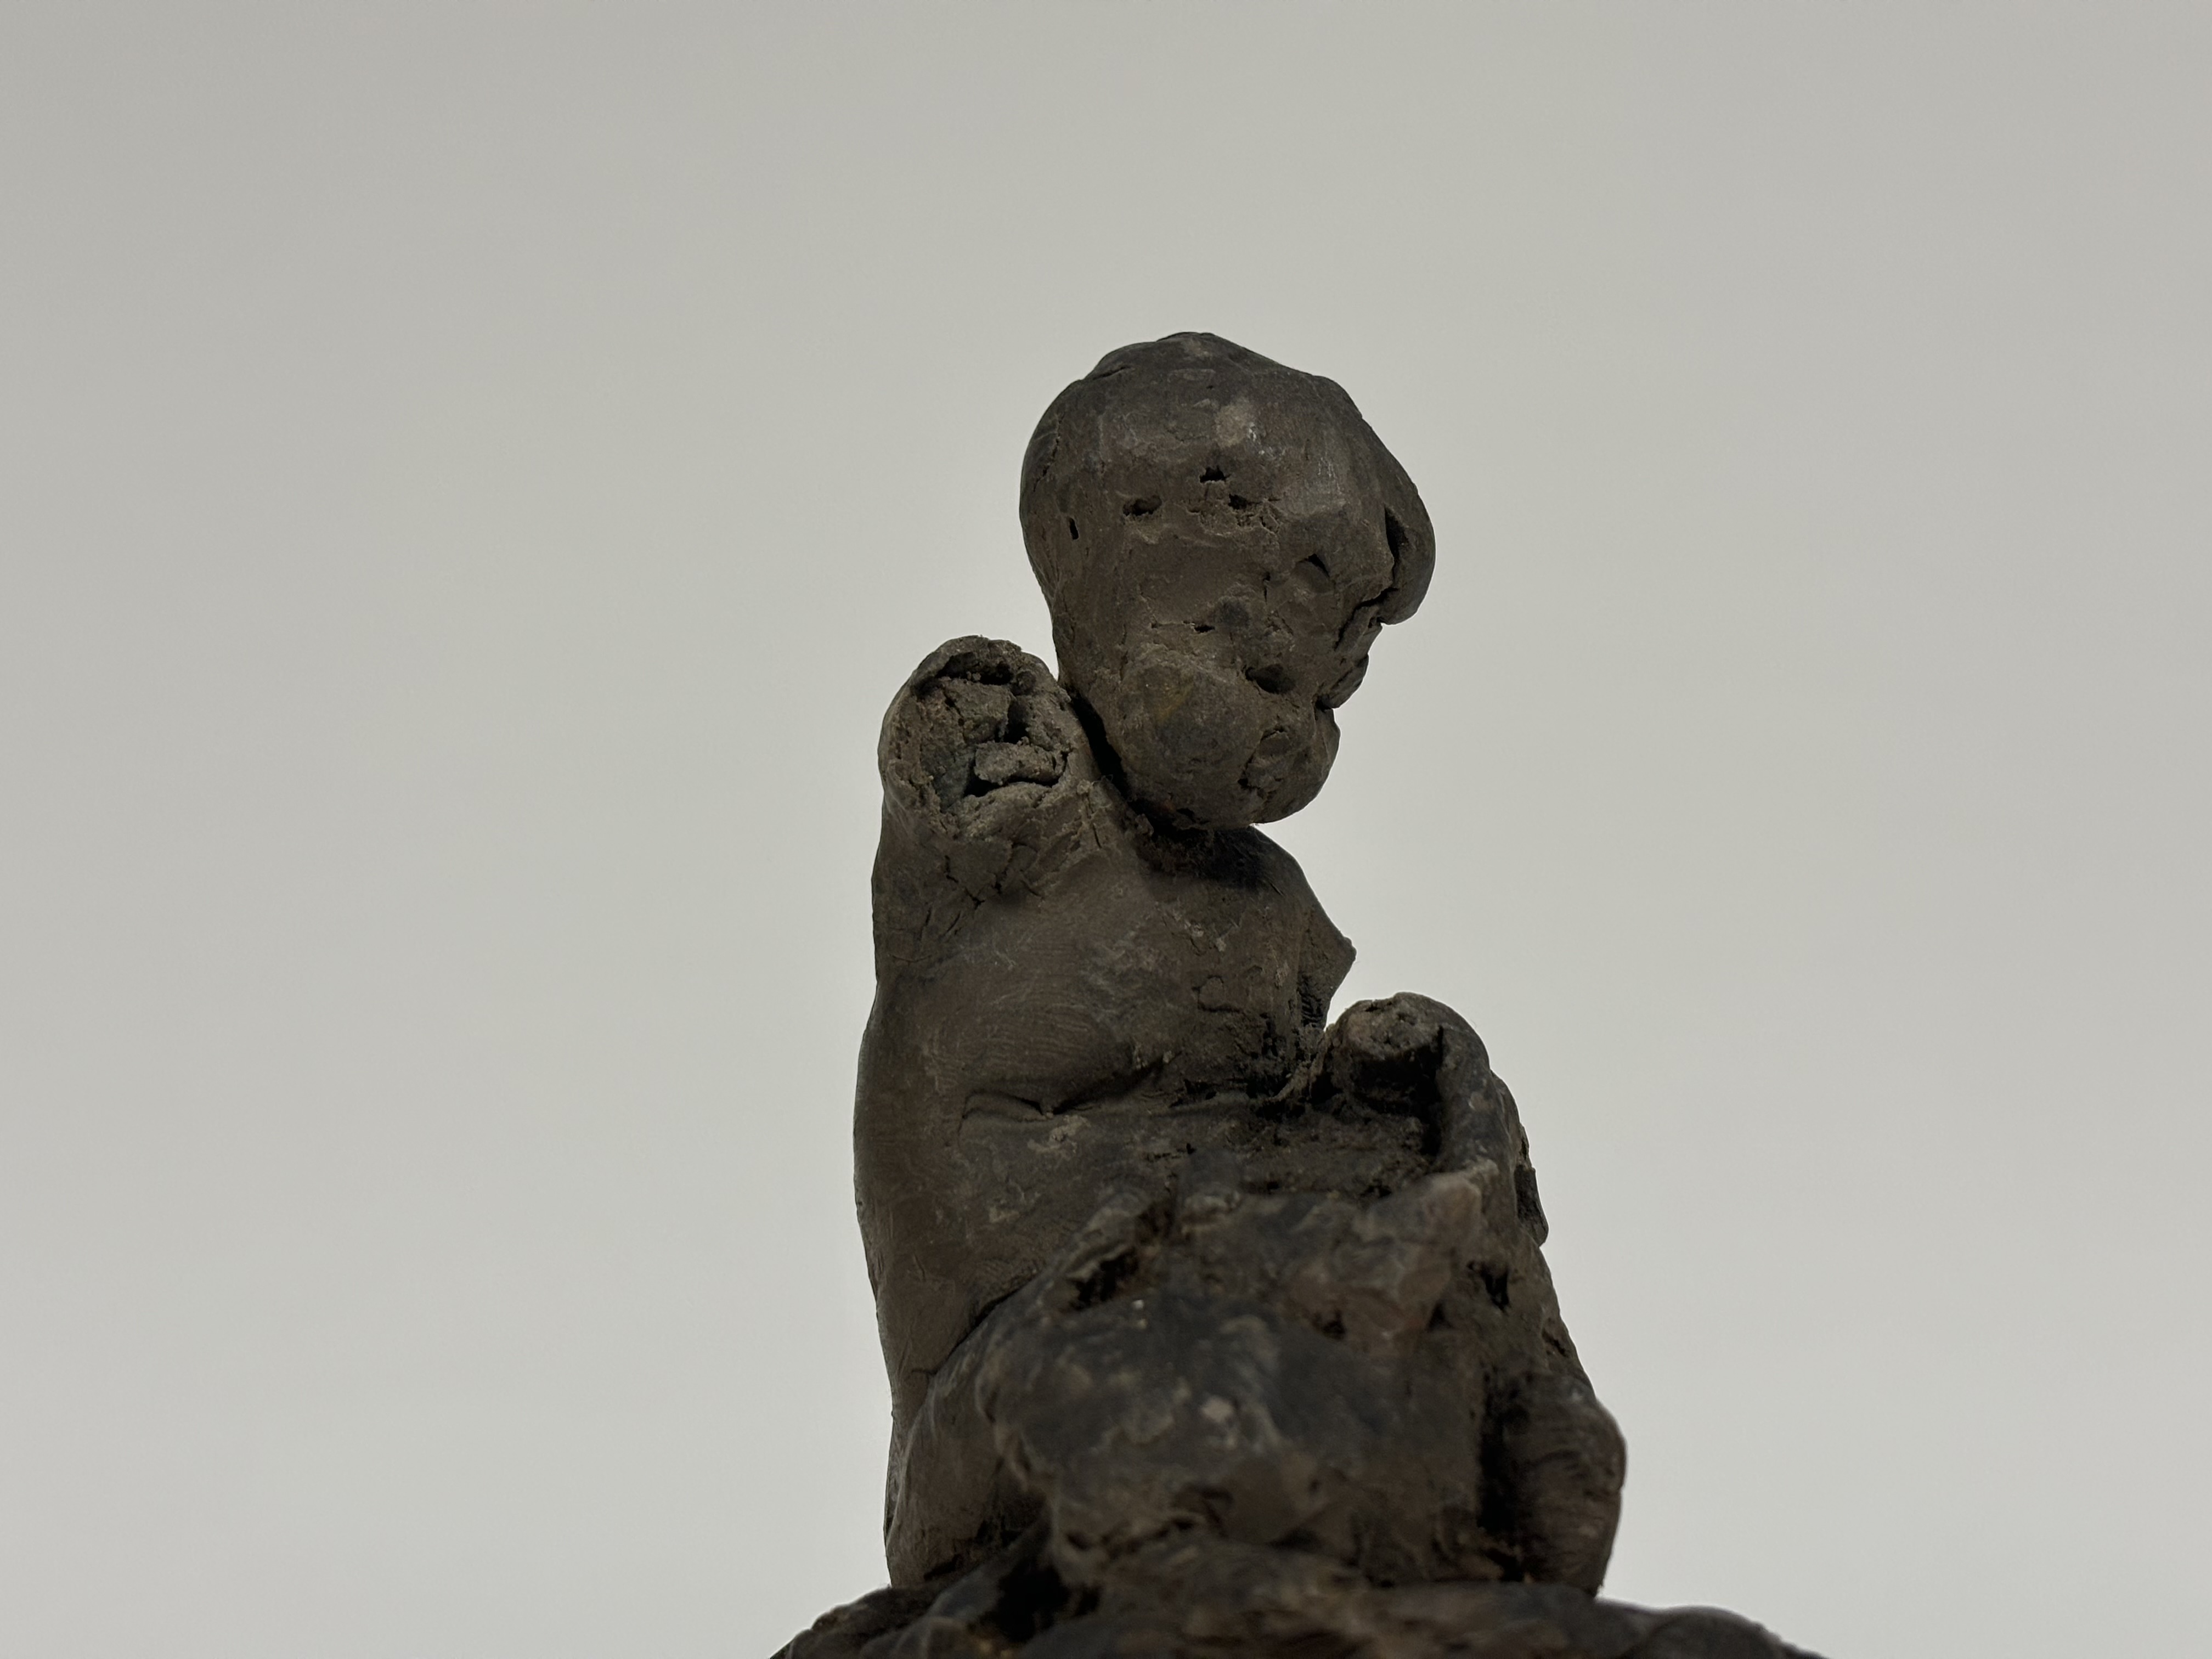 Attributed to Sophia Rosamond Praeger M.B.E. (Irish, 1867-1954), a wax maquette of a Child with a - Image 4 of 6